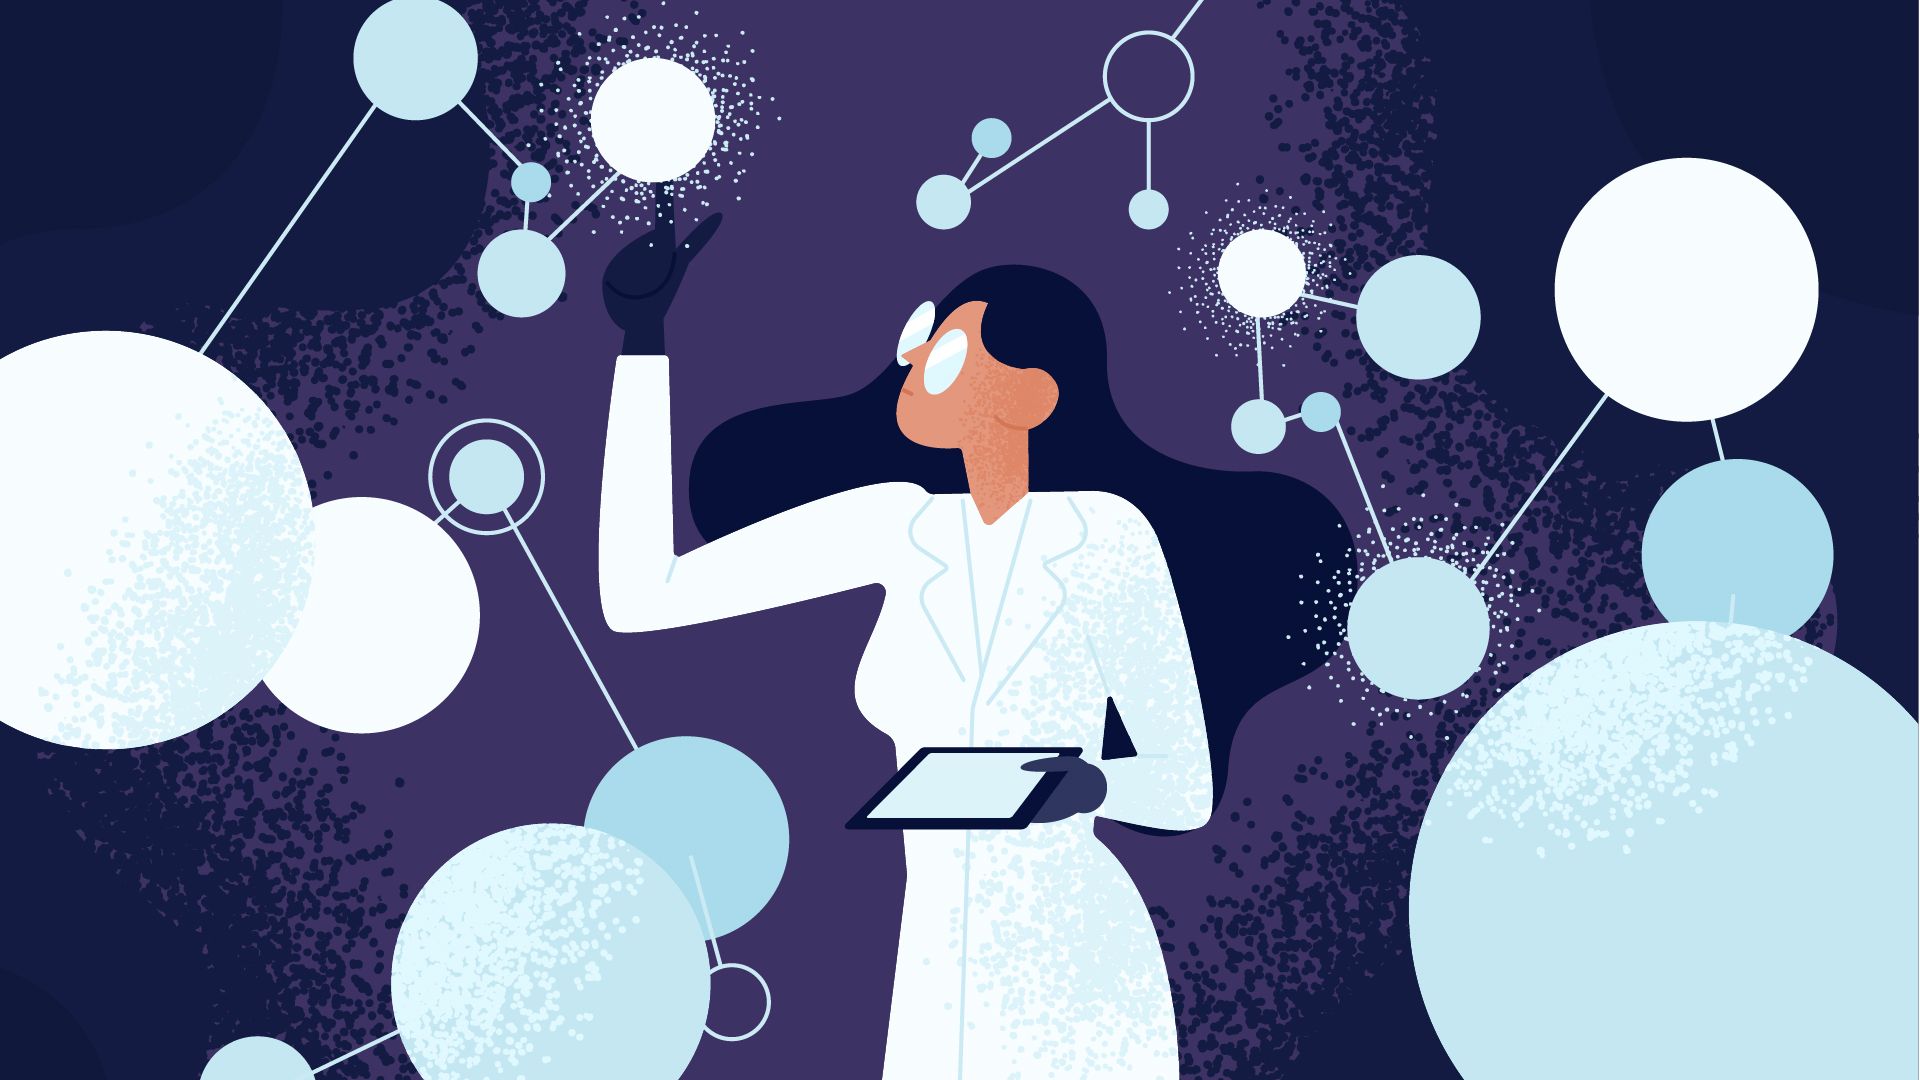 More than 500 women have joined the 500 Women Scientists database